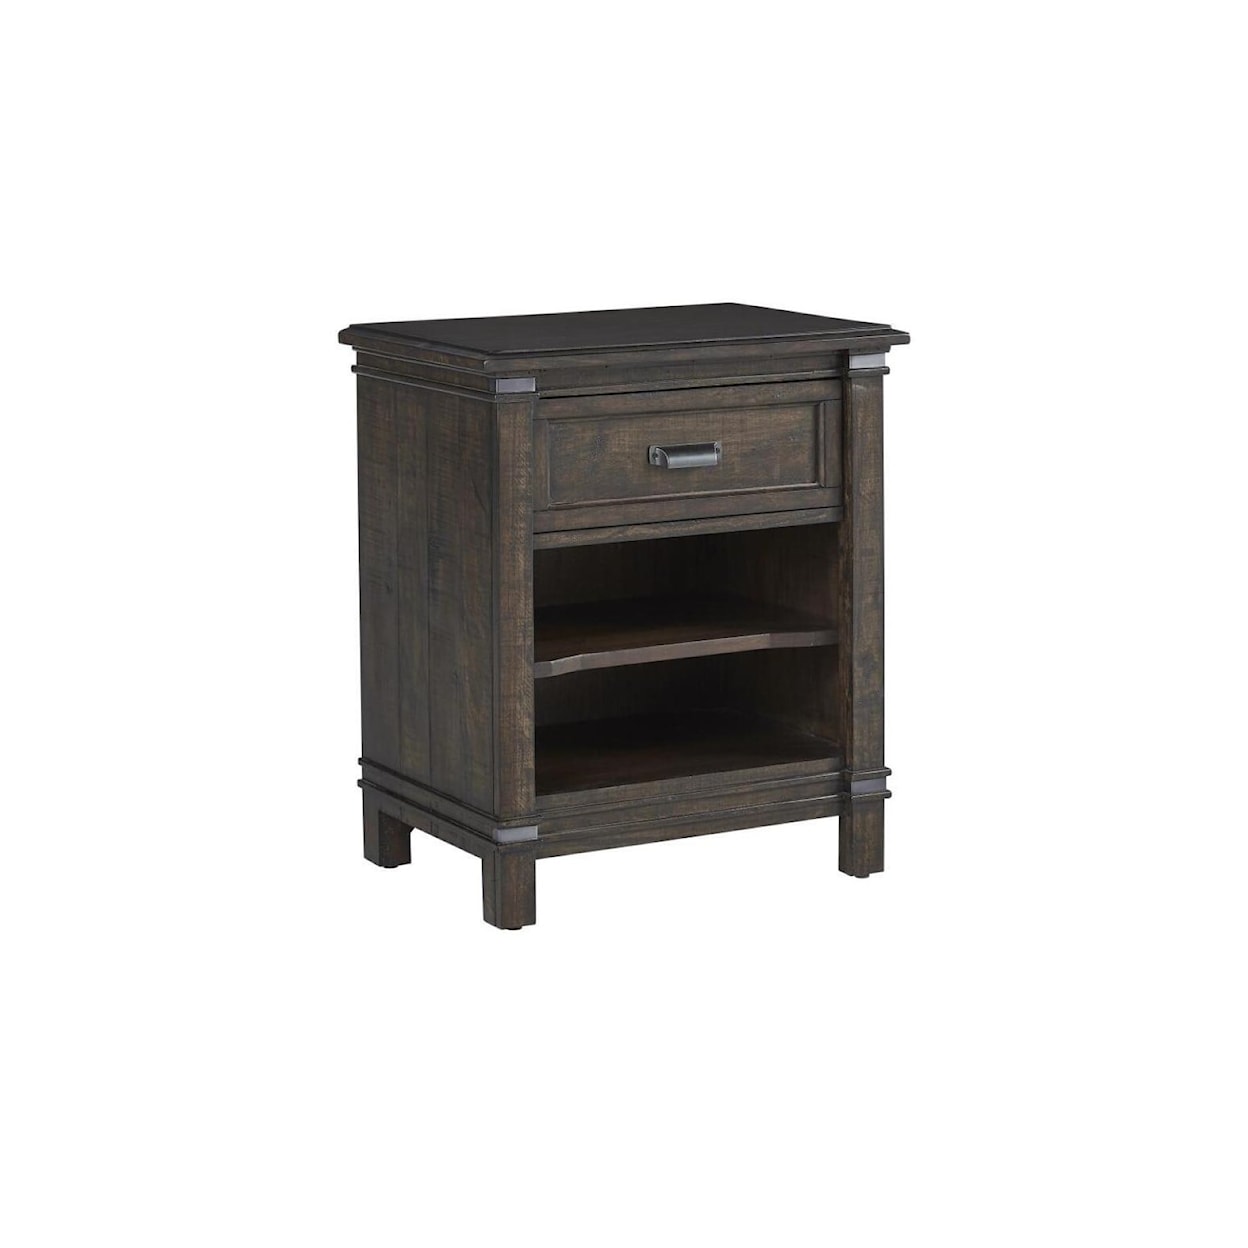 American Woodcrafters Farmwood Nightstand